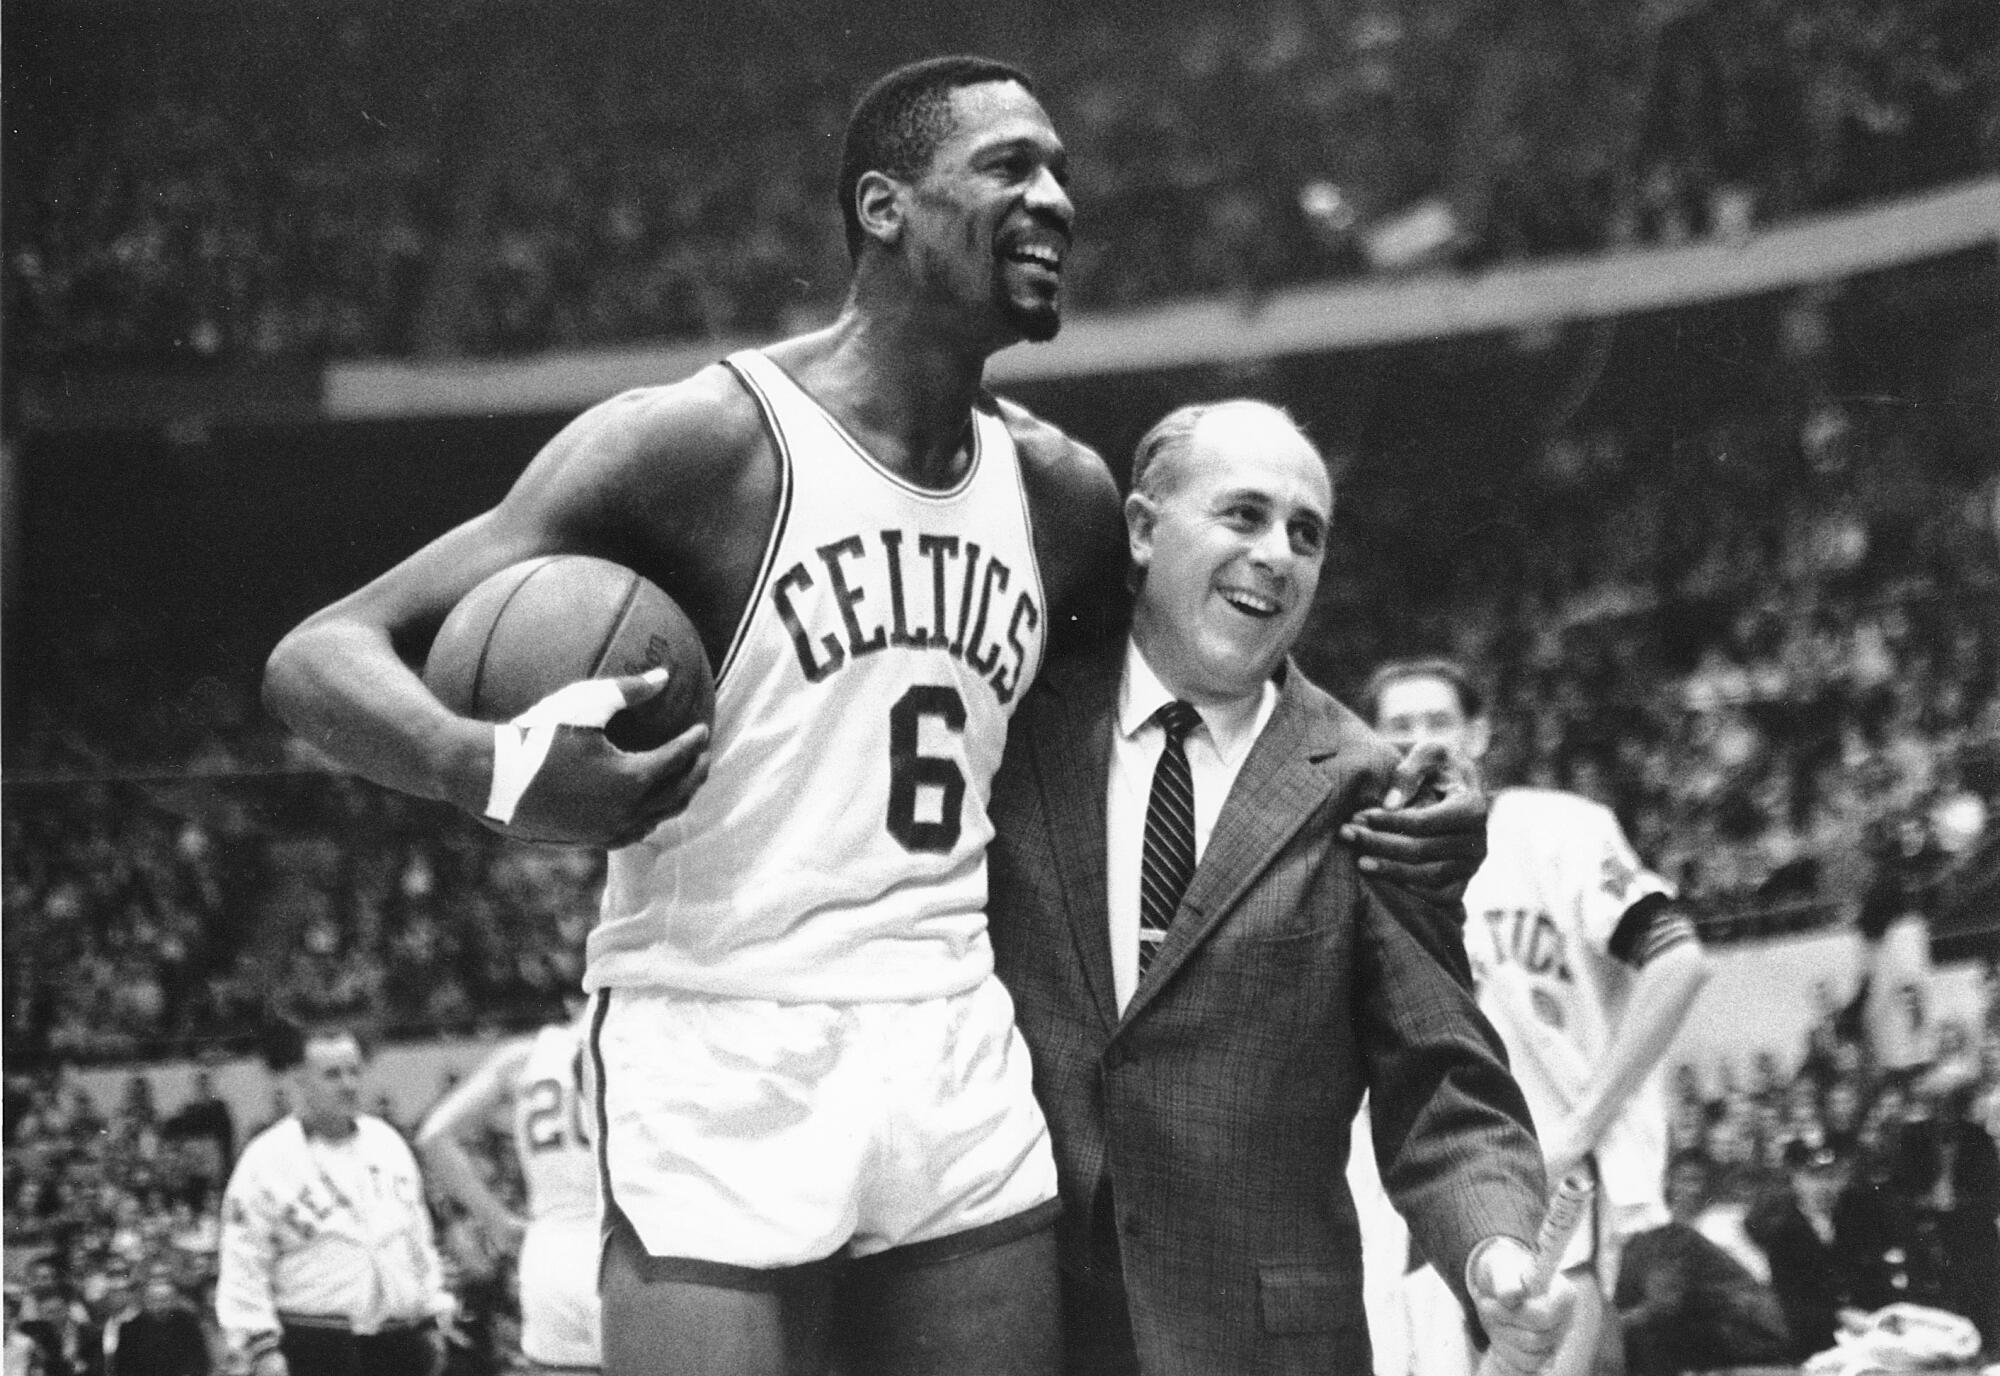 Bill Russell puts one arm around coach Red Auerbach and holds a basketball in the other arm